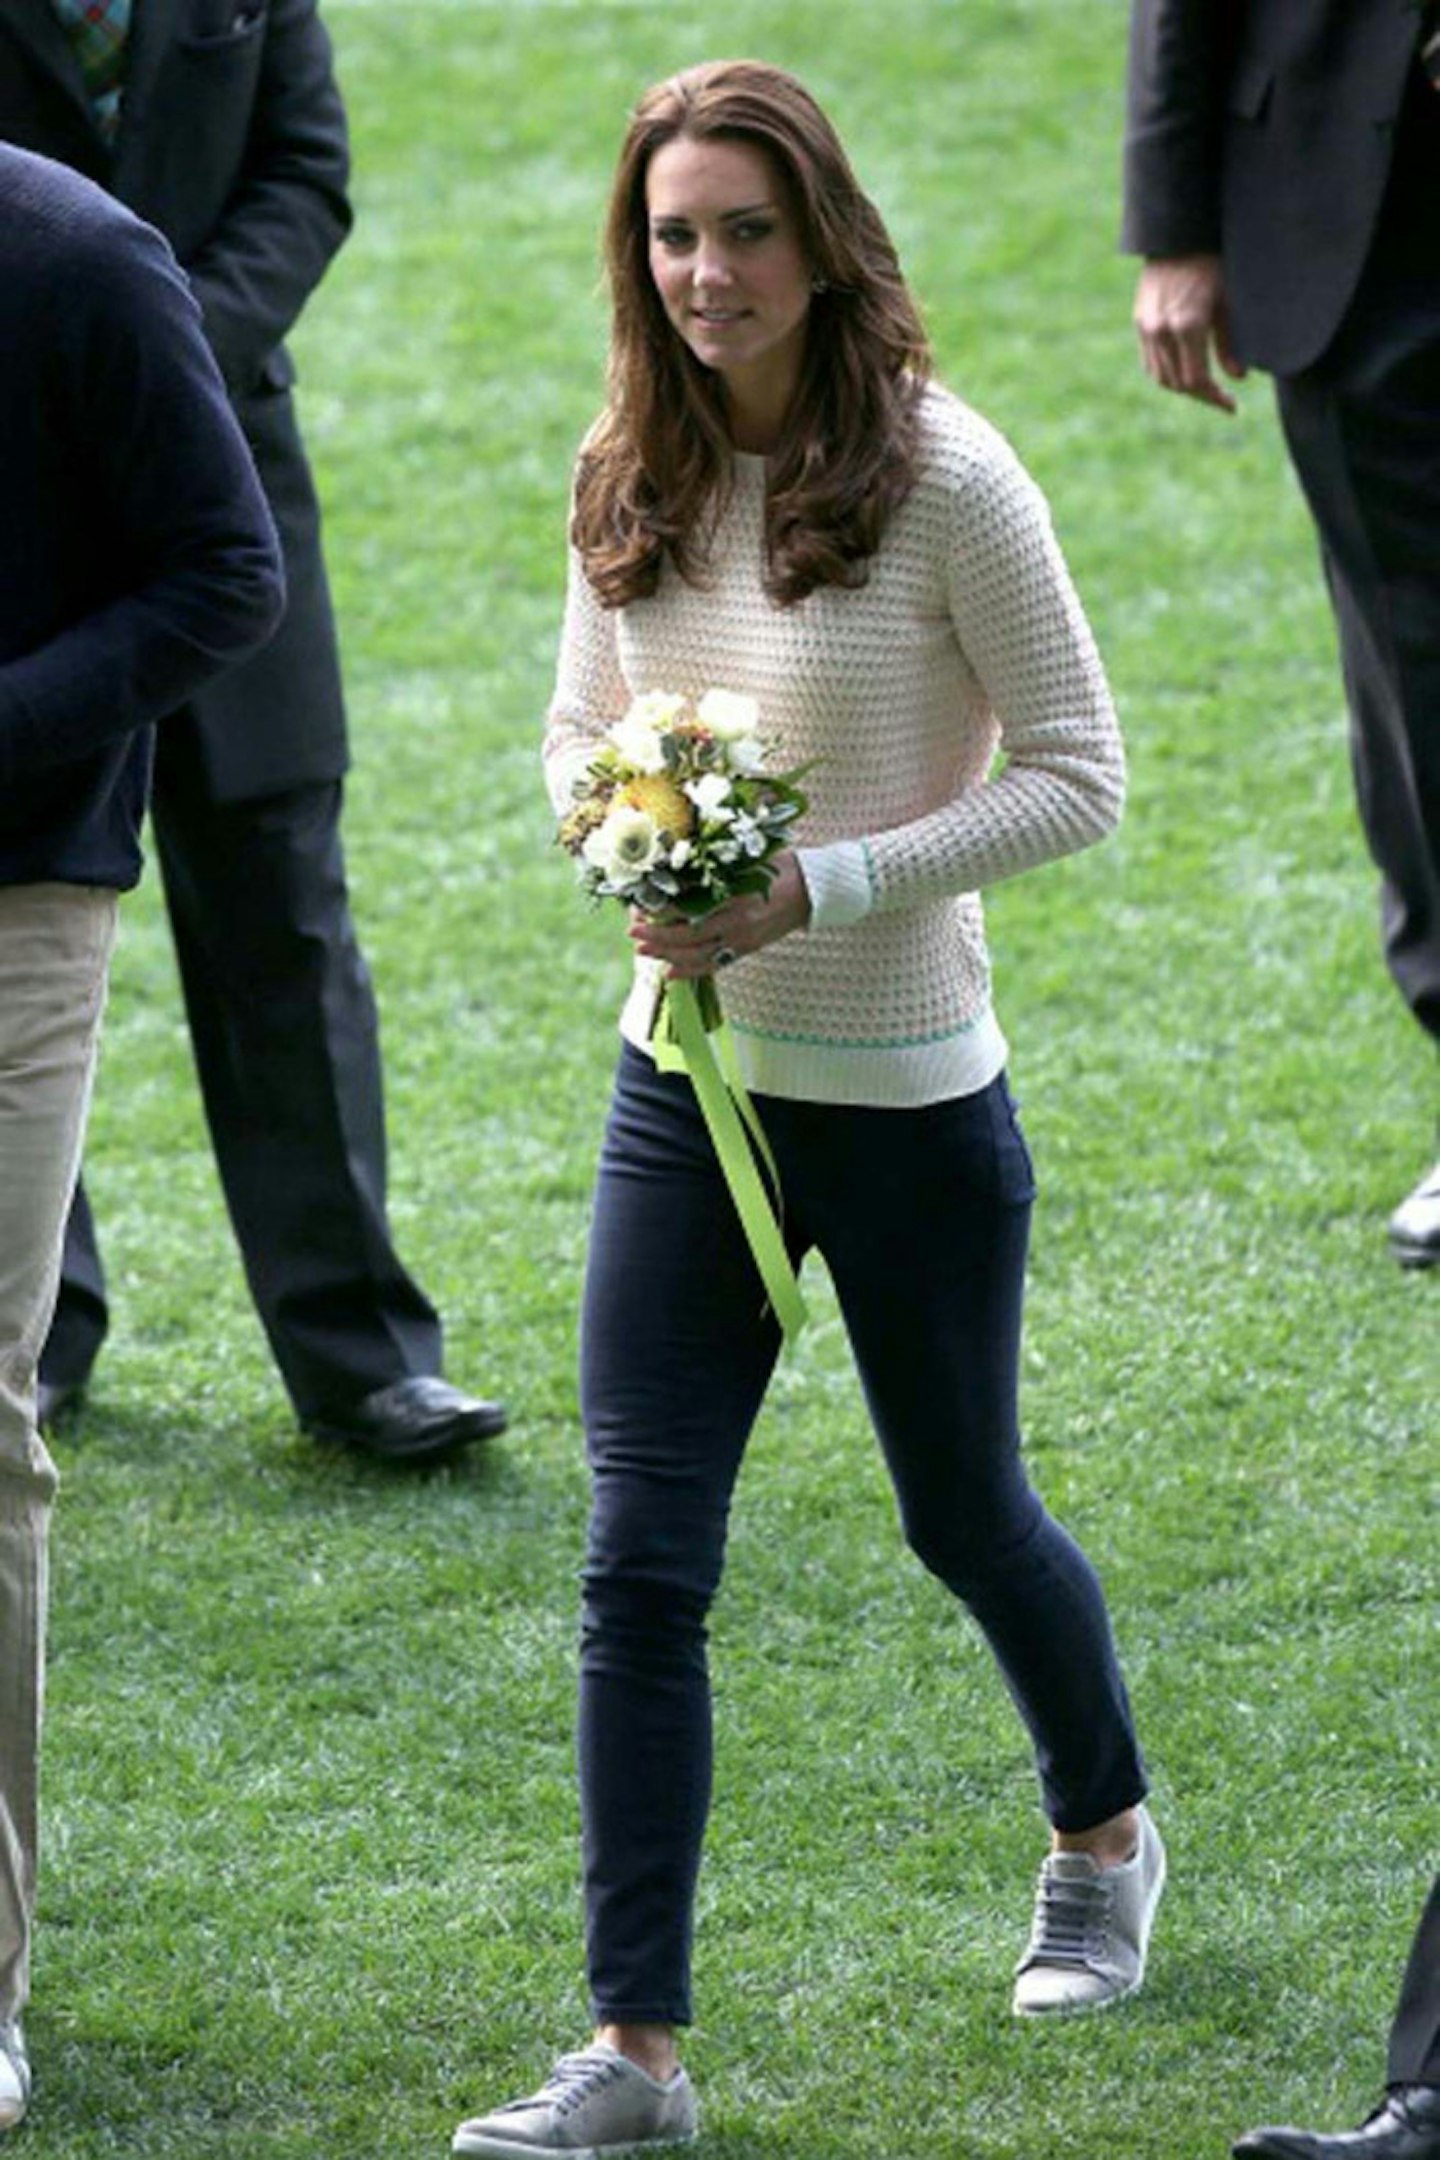 The Duchess of Cambridge wears Jonathan Saunders at rugby in Dunedin, New Zealand, 13 April 2014